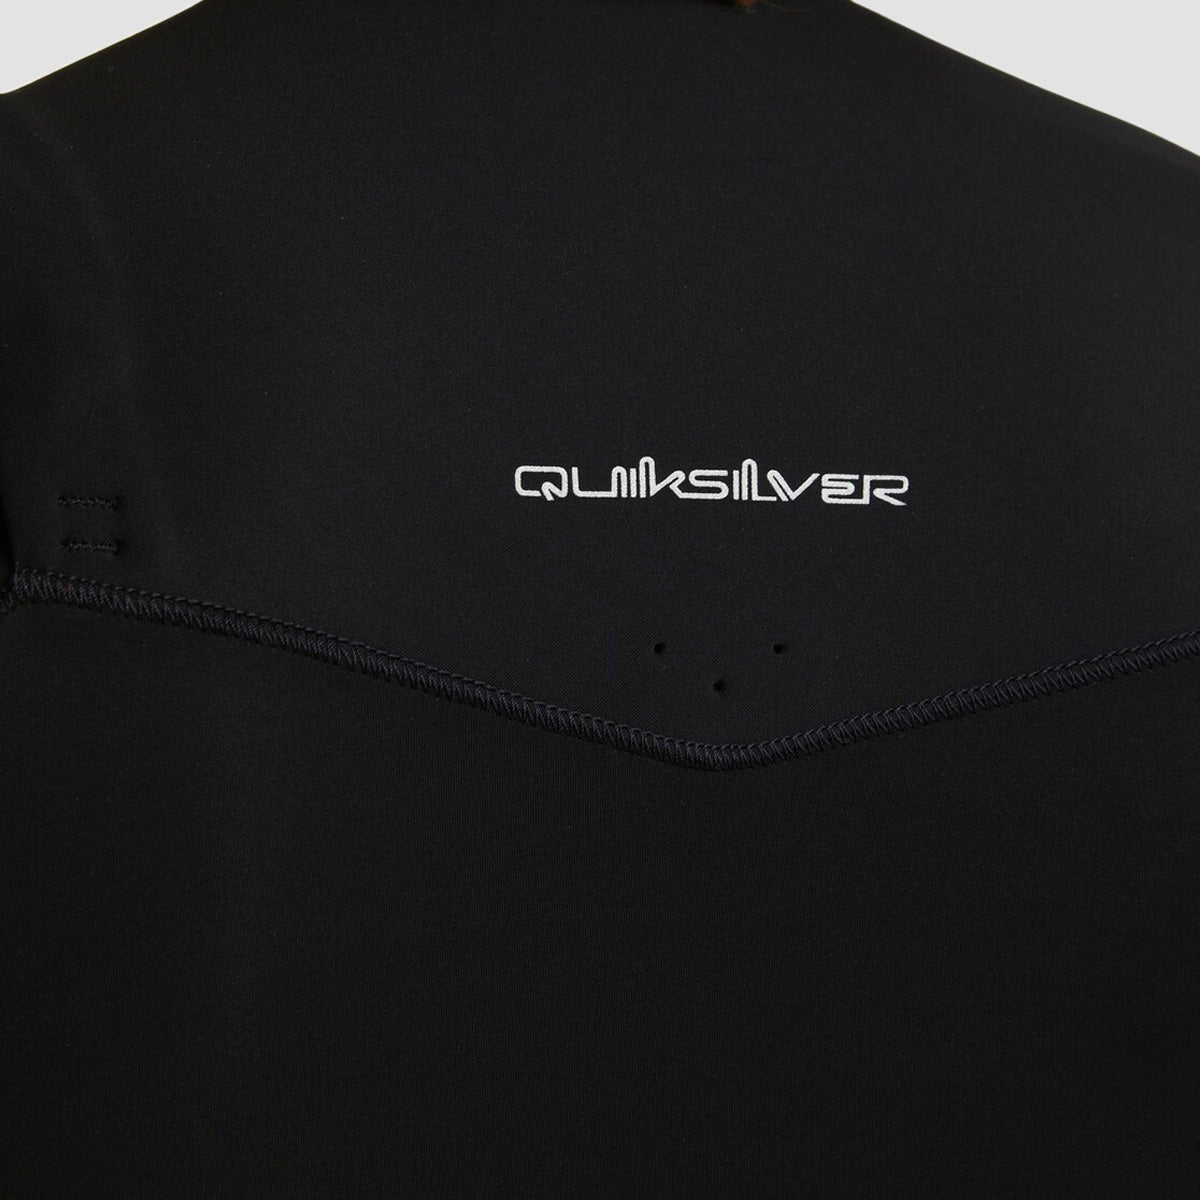 Quiksilver Everyday Sessions 3/2mm Chest Zip Wetsuit Black